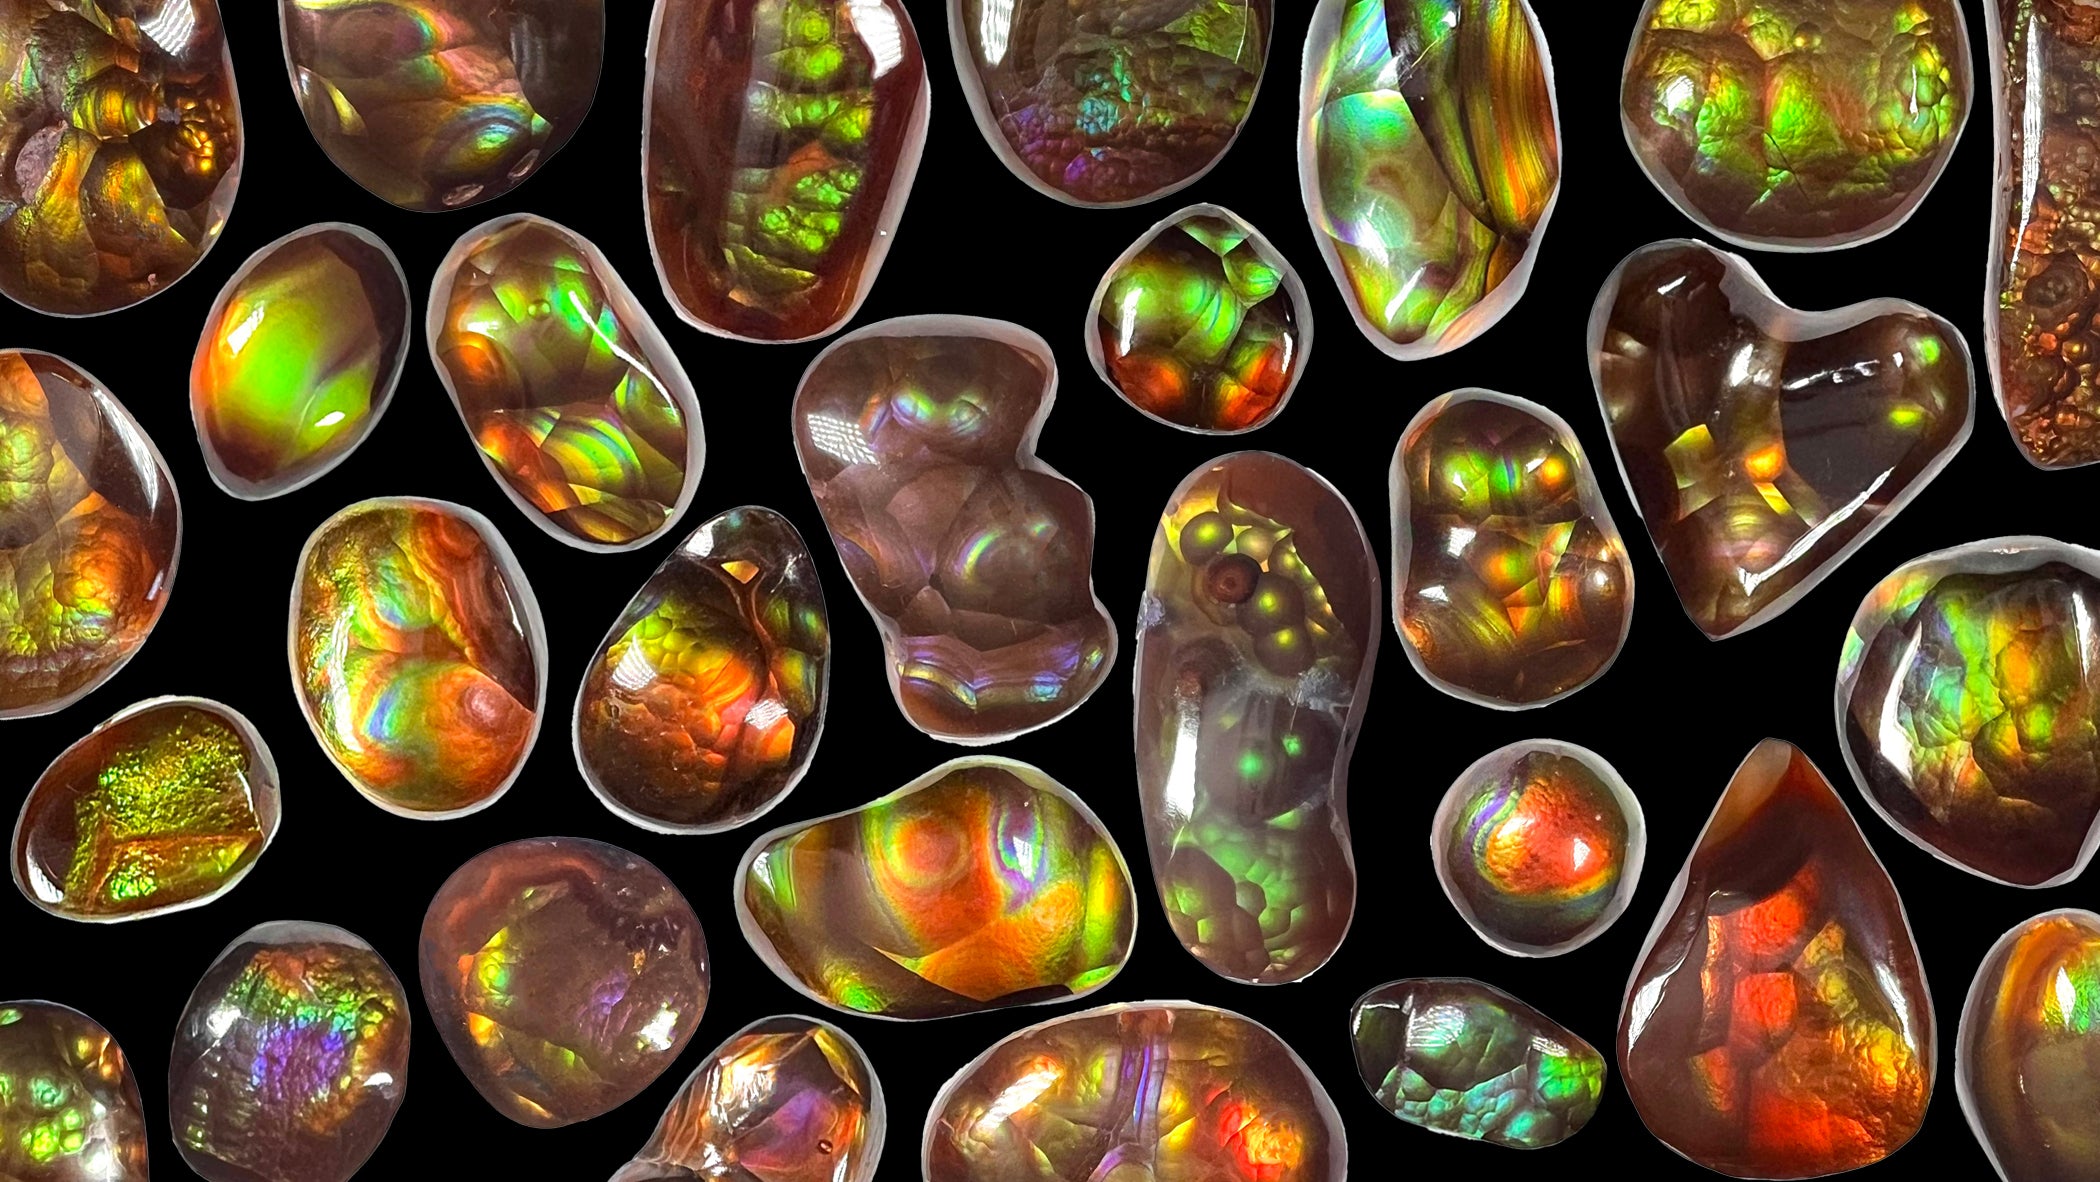 A variety of colorful Mexican fire agate cabochons arranged on a black background.